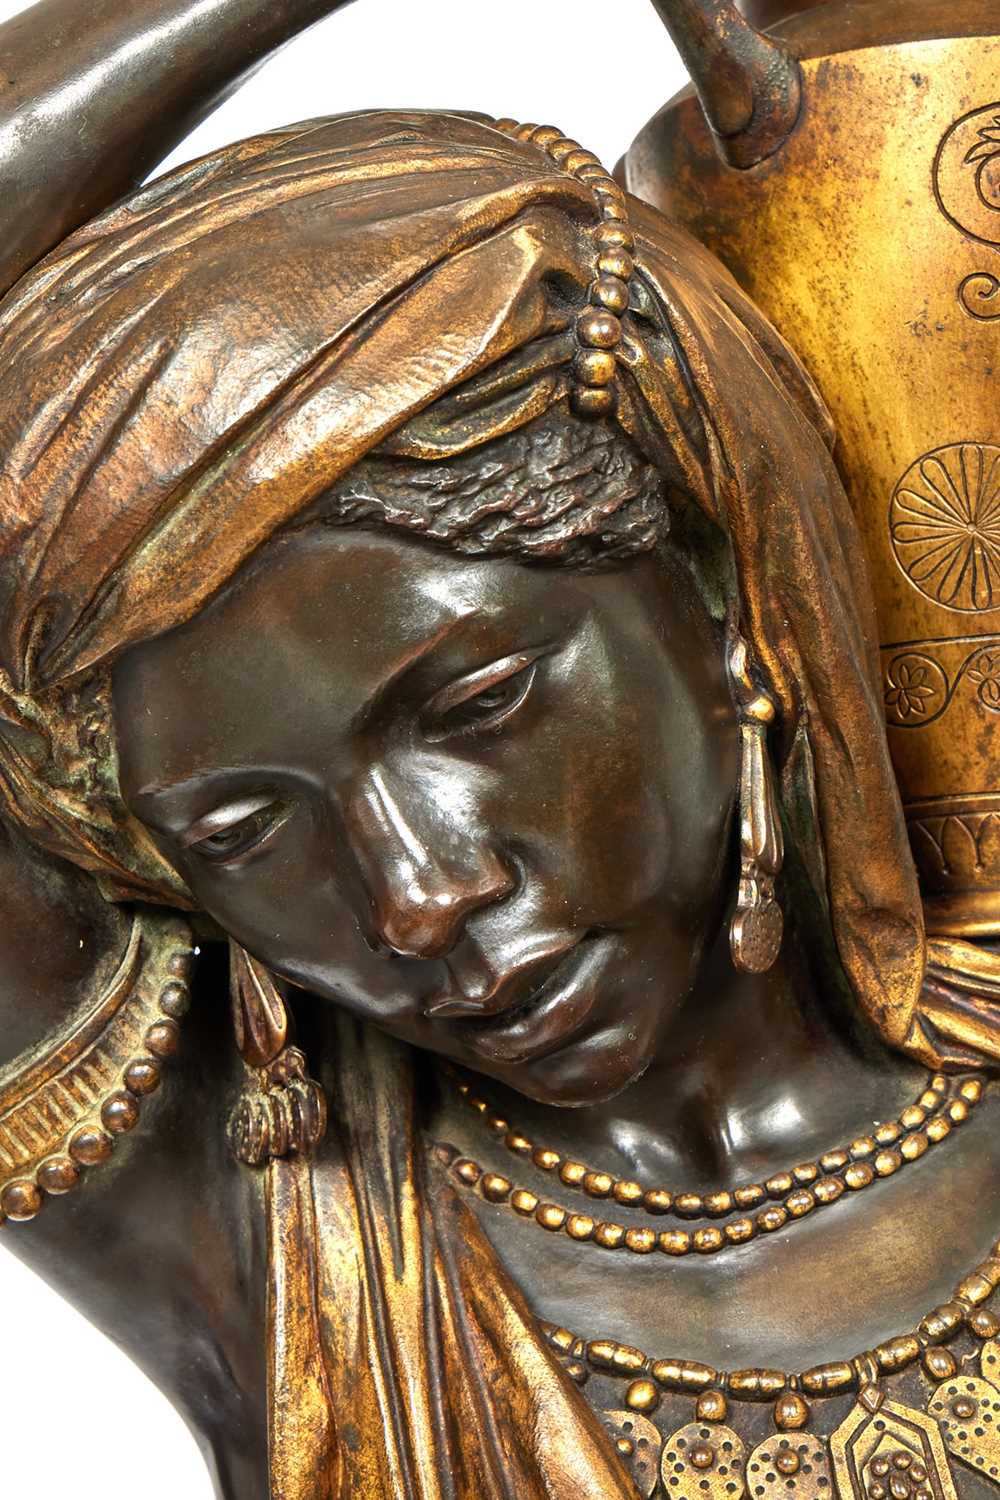 GRAUX-MARLY, PARIS: A 19TH CENTURY LIFE-SIZE ORIENTALIST BRONZE OF A NUBIAN WATER CARRIER - Image 3 of 5